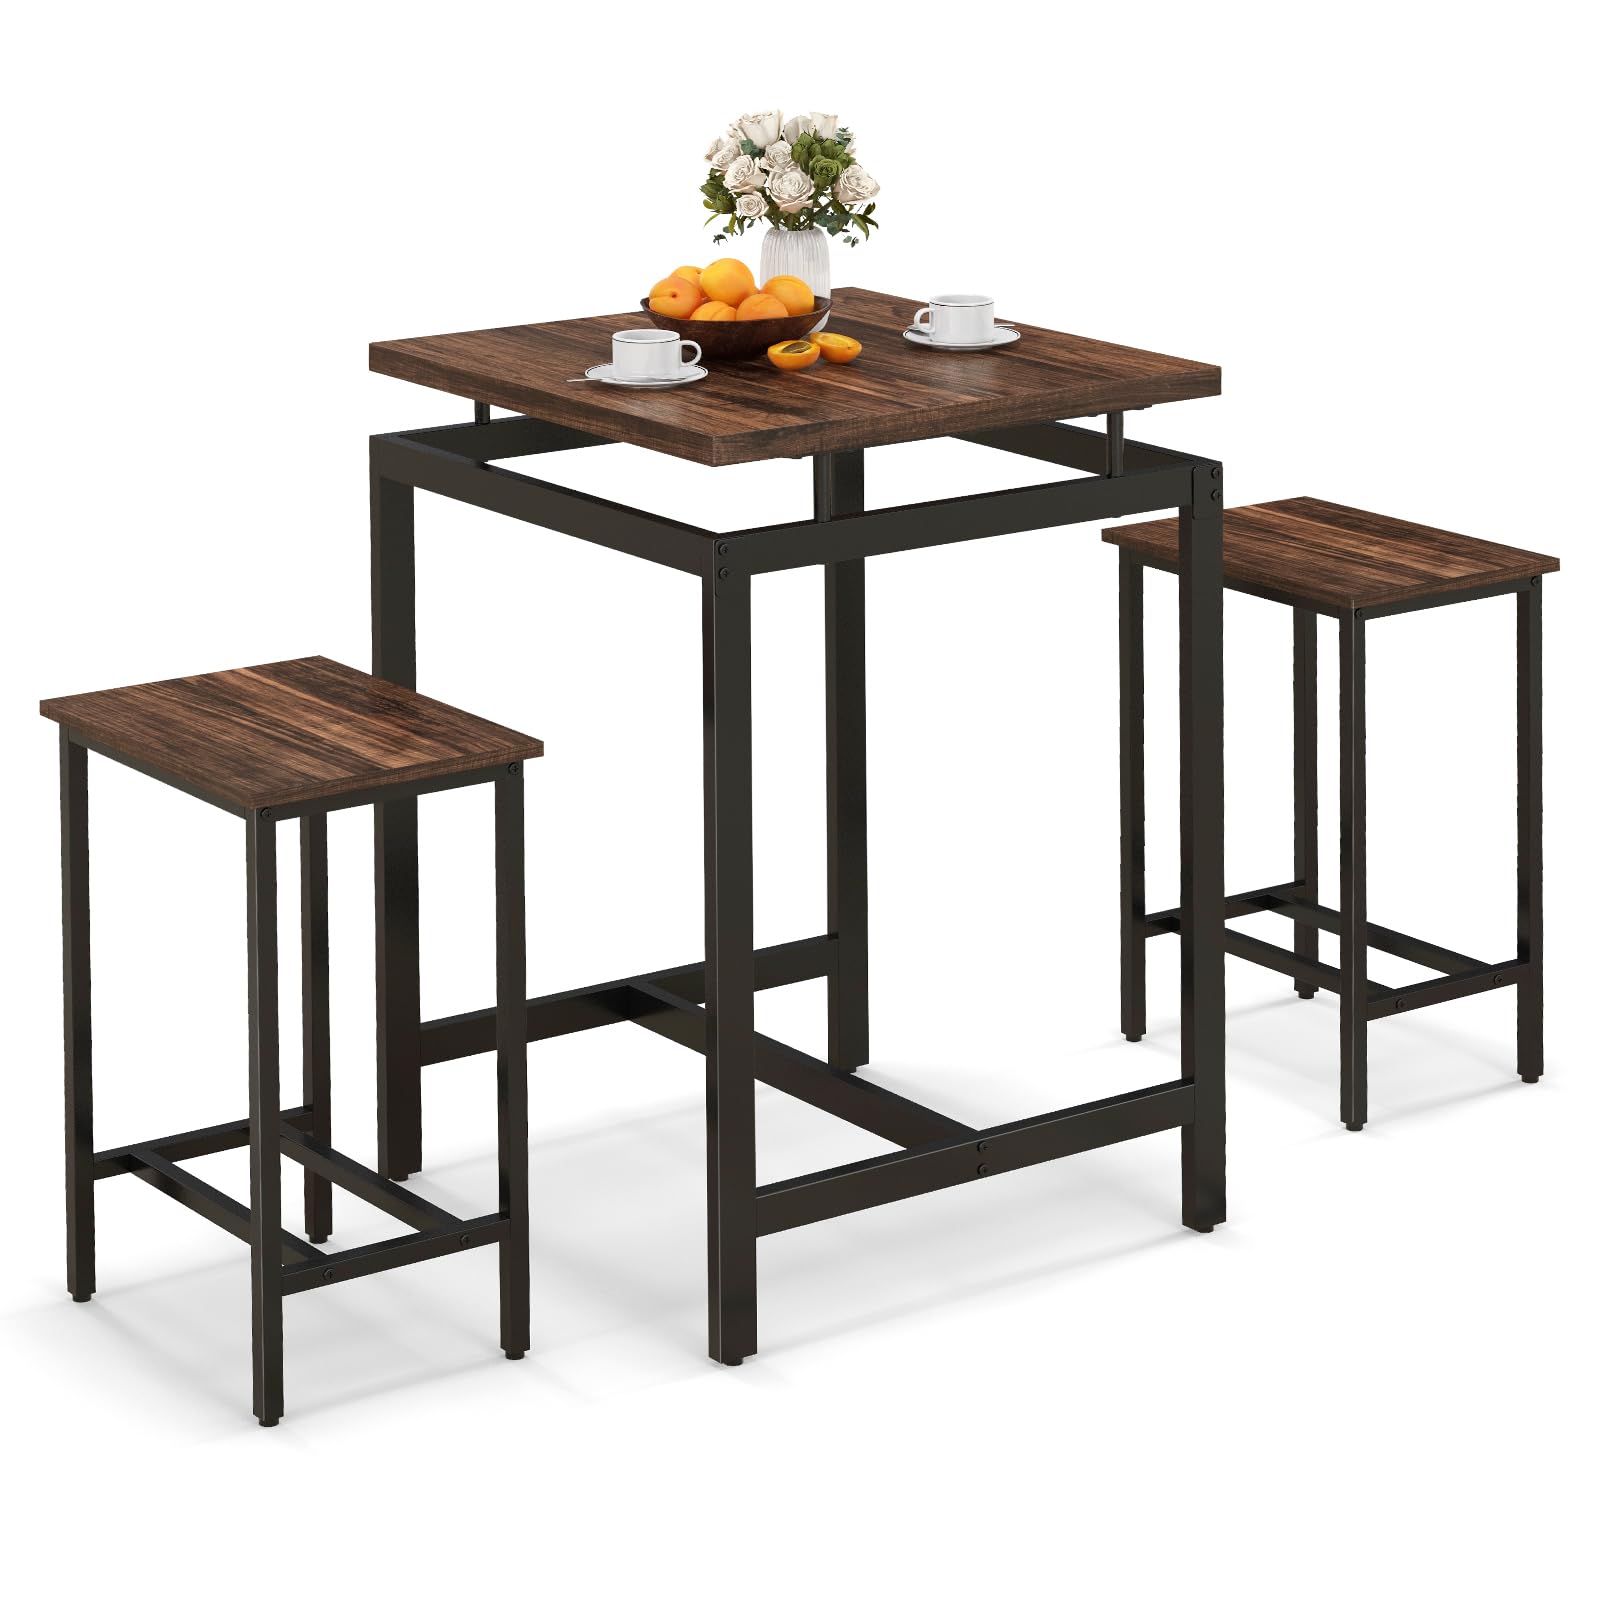 Giantex Small Dining Table Set for 2 - Counter Height Table Set with 2 Stools